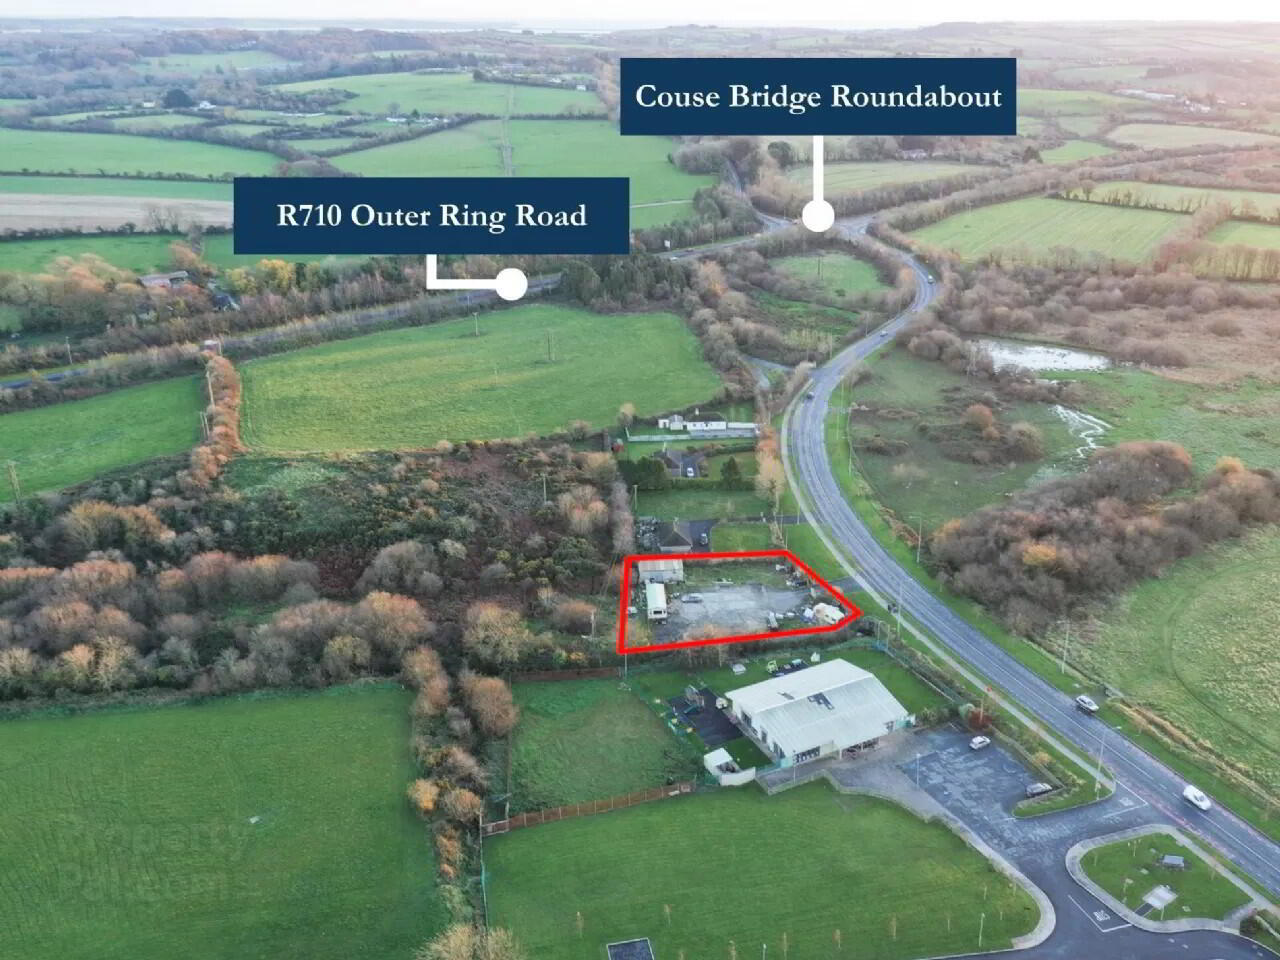 0.37 Acre Site At Couse